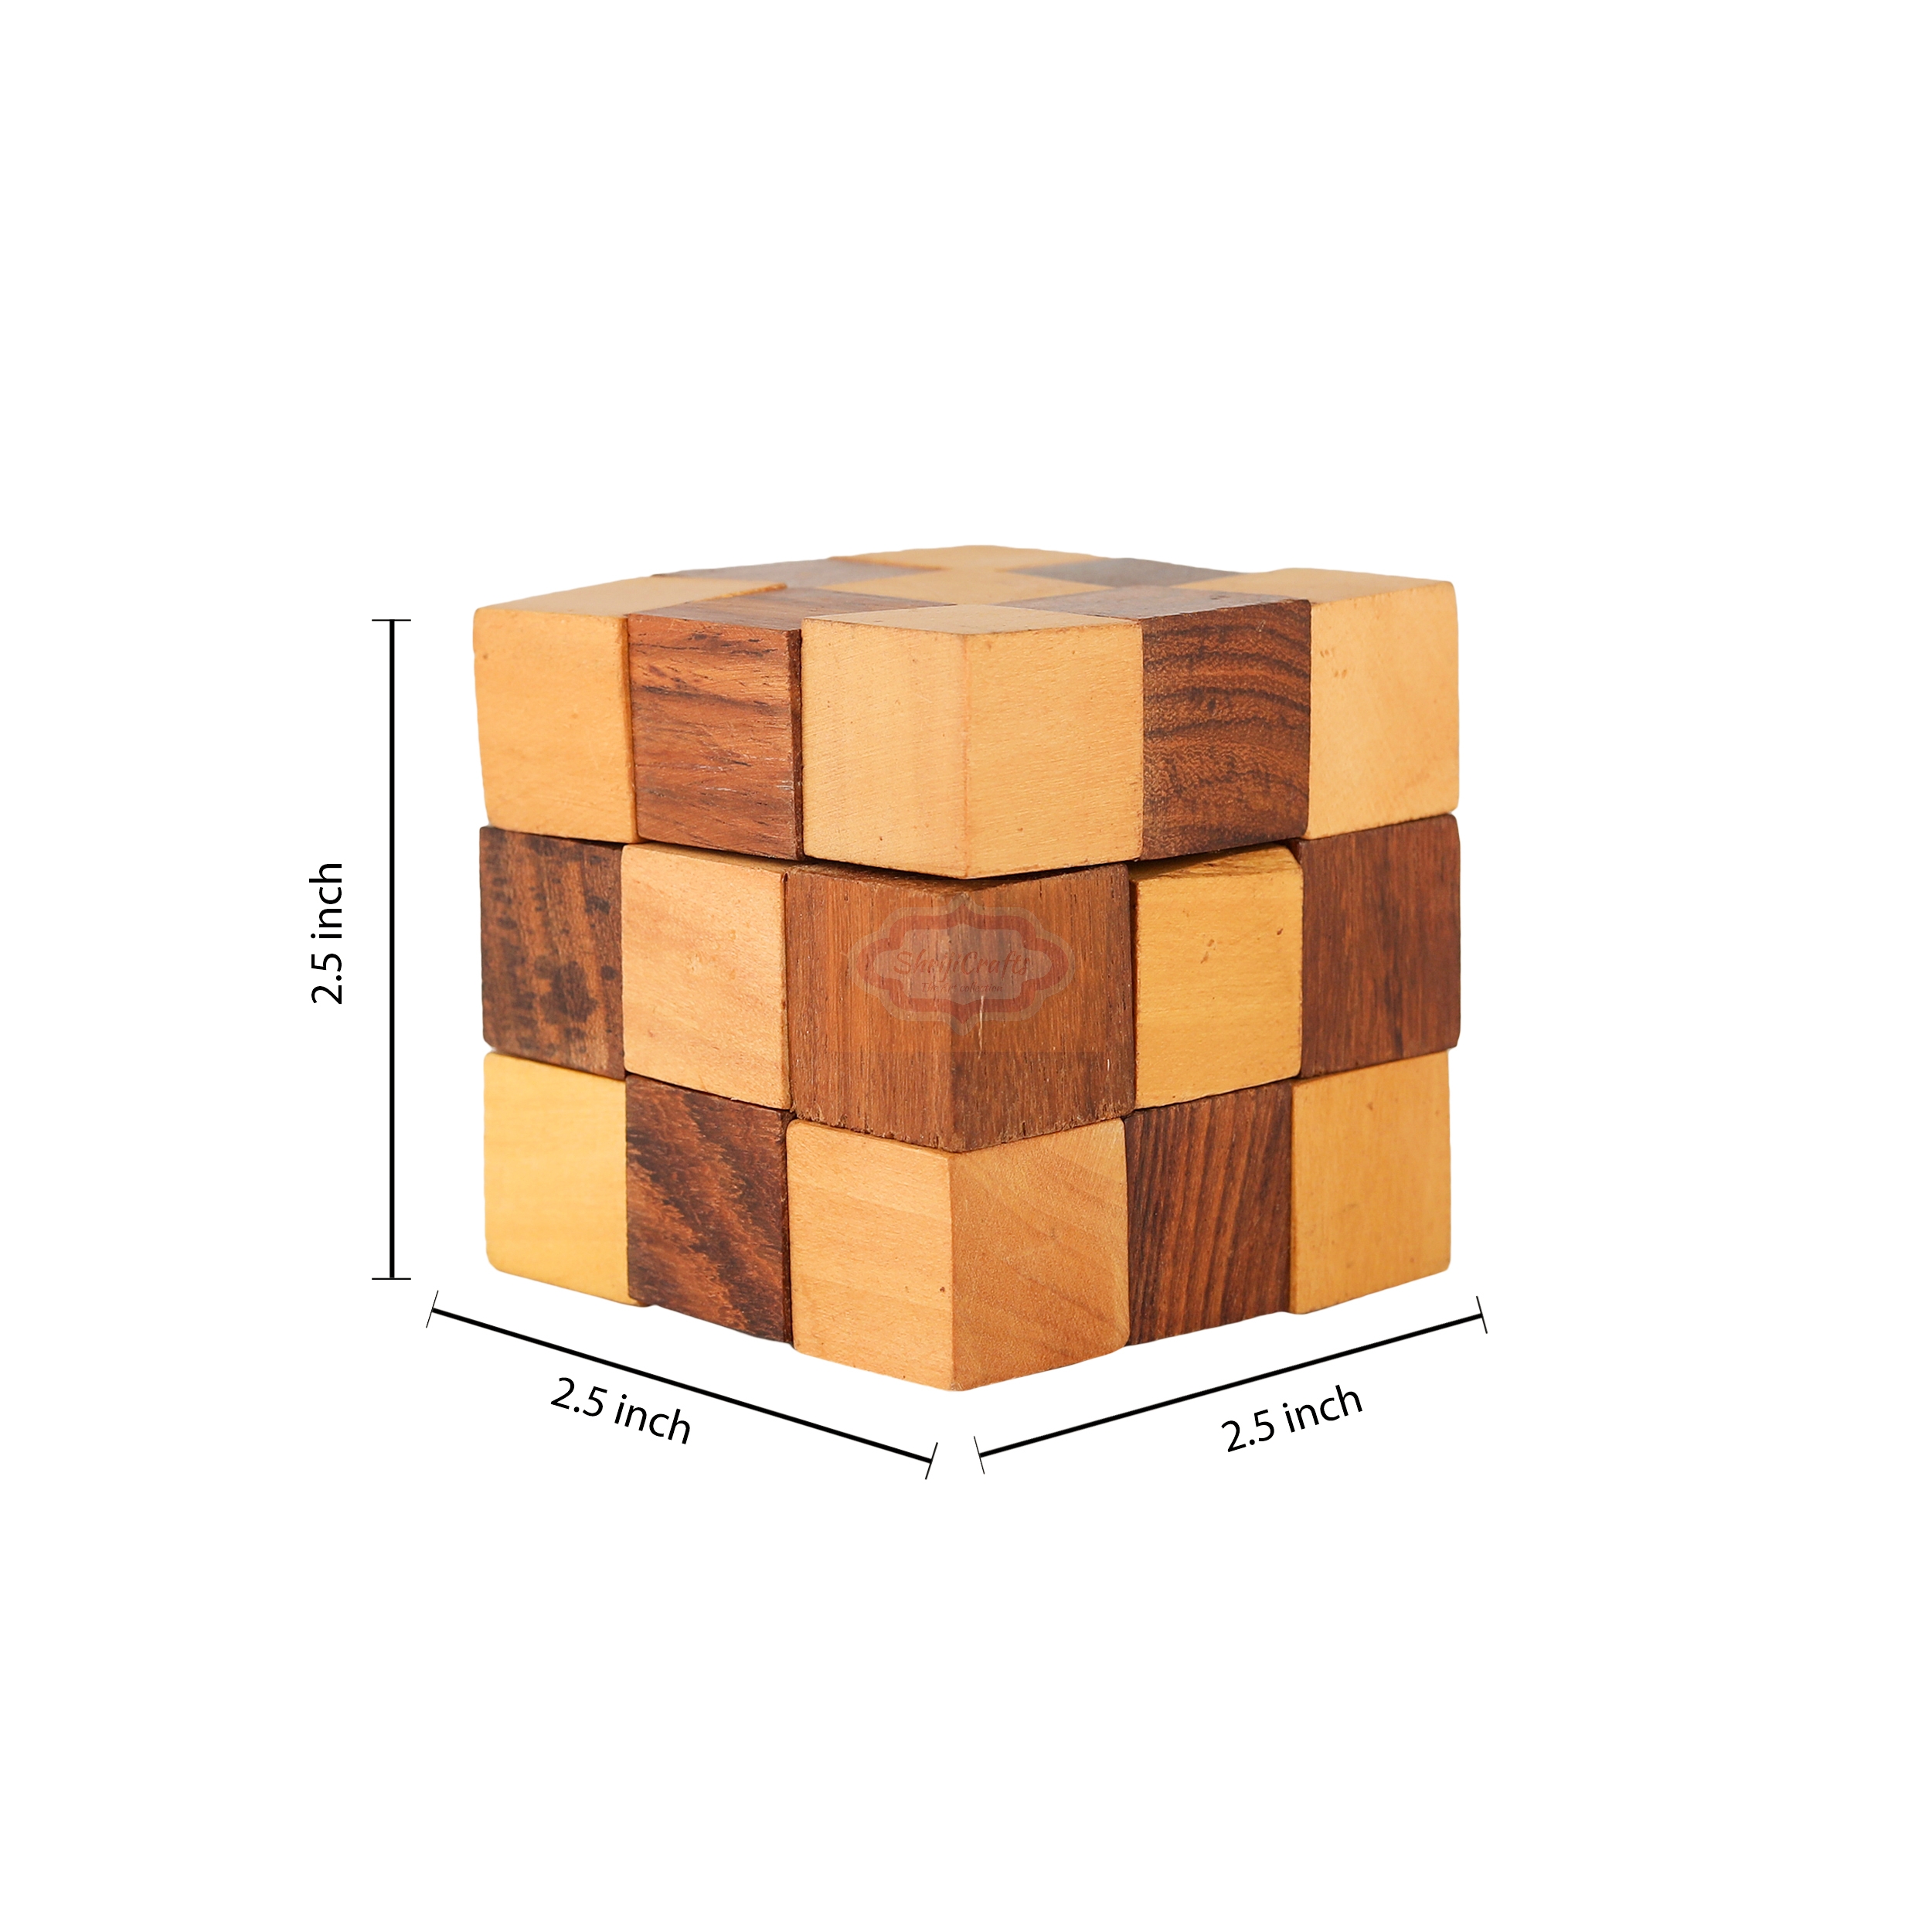 Shrijicrafts | ShrijiCrafts® Wooden IQ Teaser Puzzle Adult Snake Cube Handmade India Unique Gifts for Kids and Adult (2.5x2.5x2.5-inch) 5